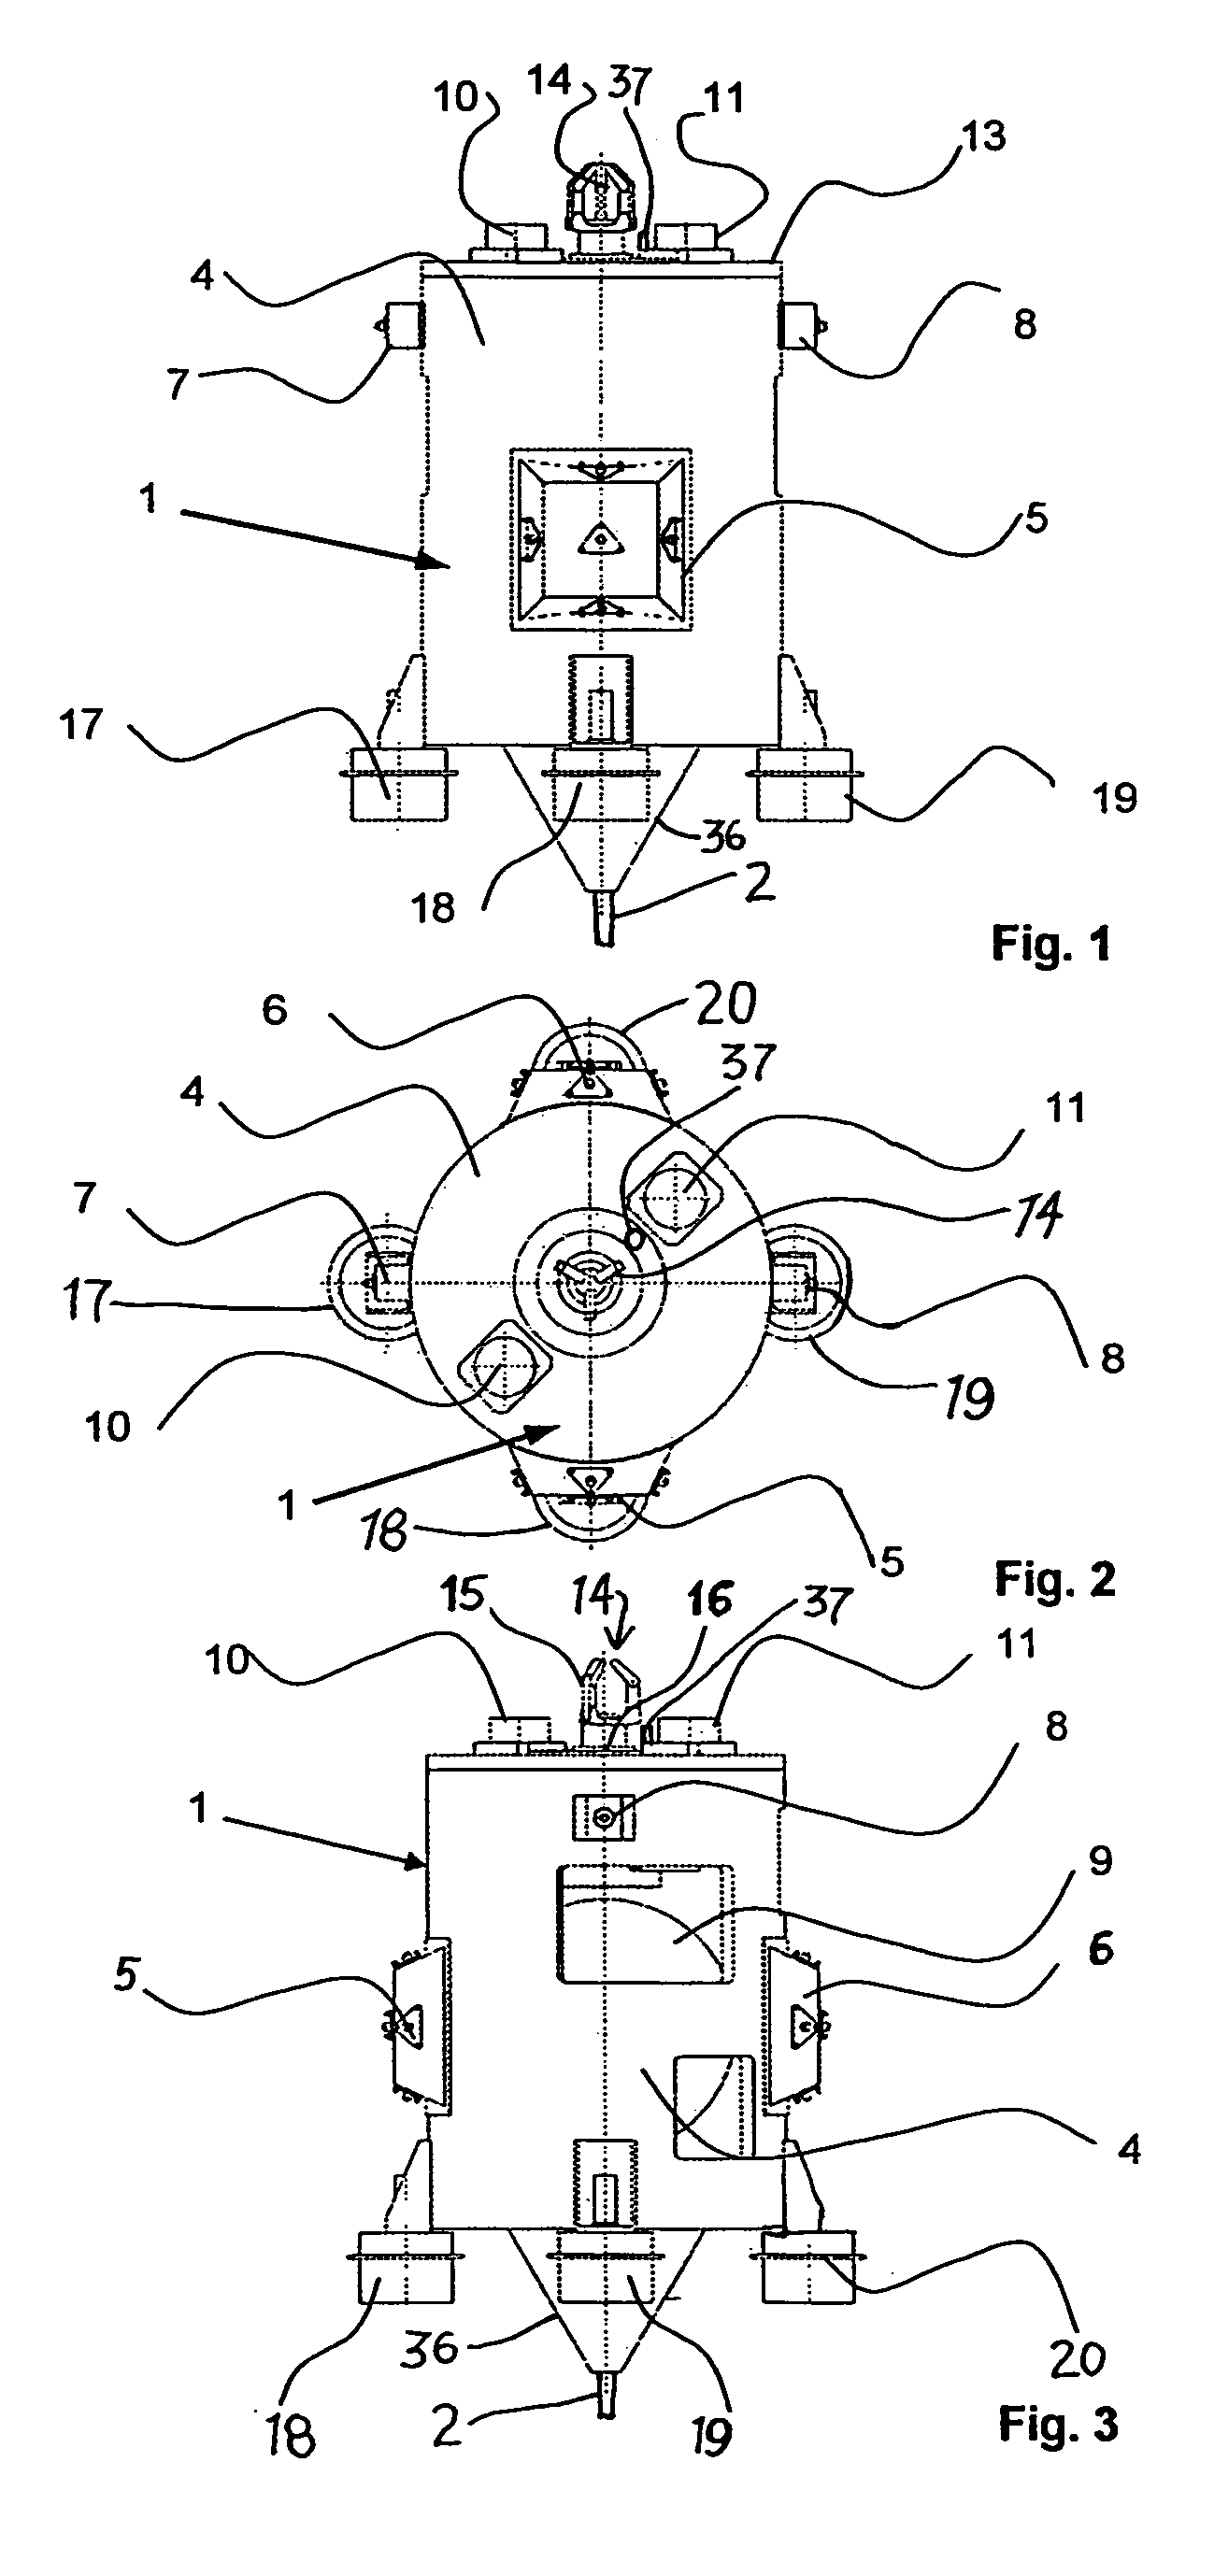 Apparatus for grasping objects in space